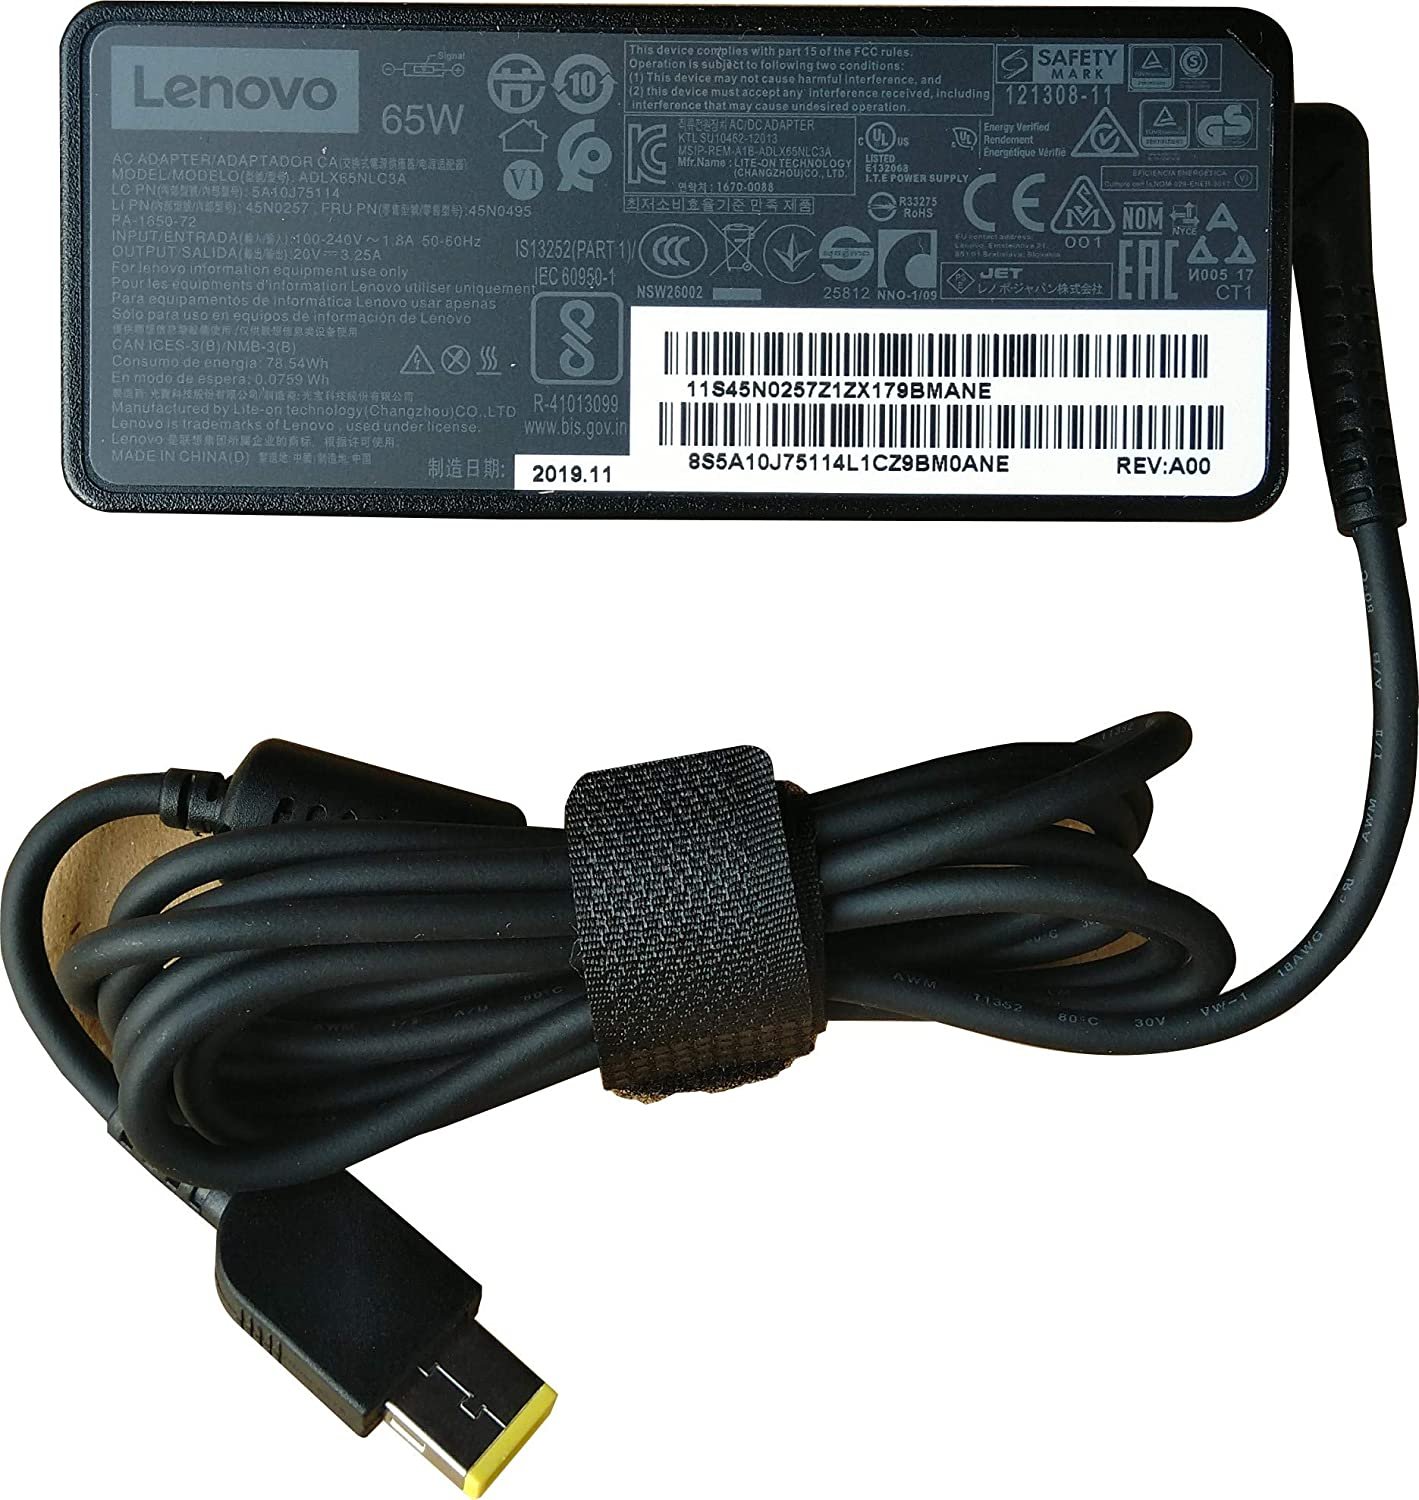 65W Laptop Charger for Lenovo ThinkPad X1 Carbon 344456U Ultrabook IBM  Power Supply Adapter 20V  with Power Cord - World IT Hub